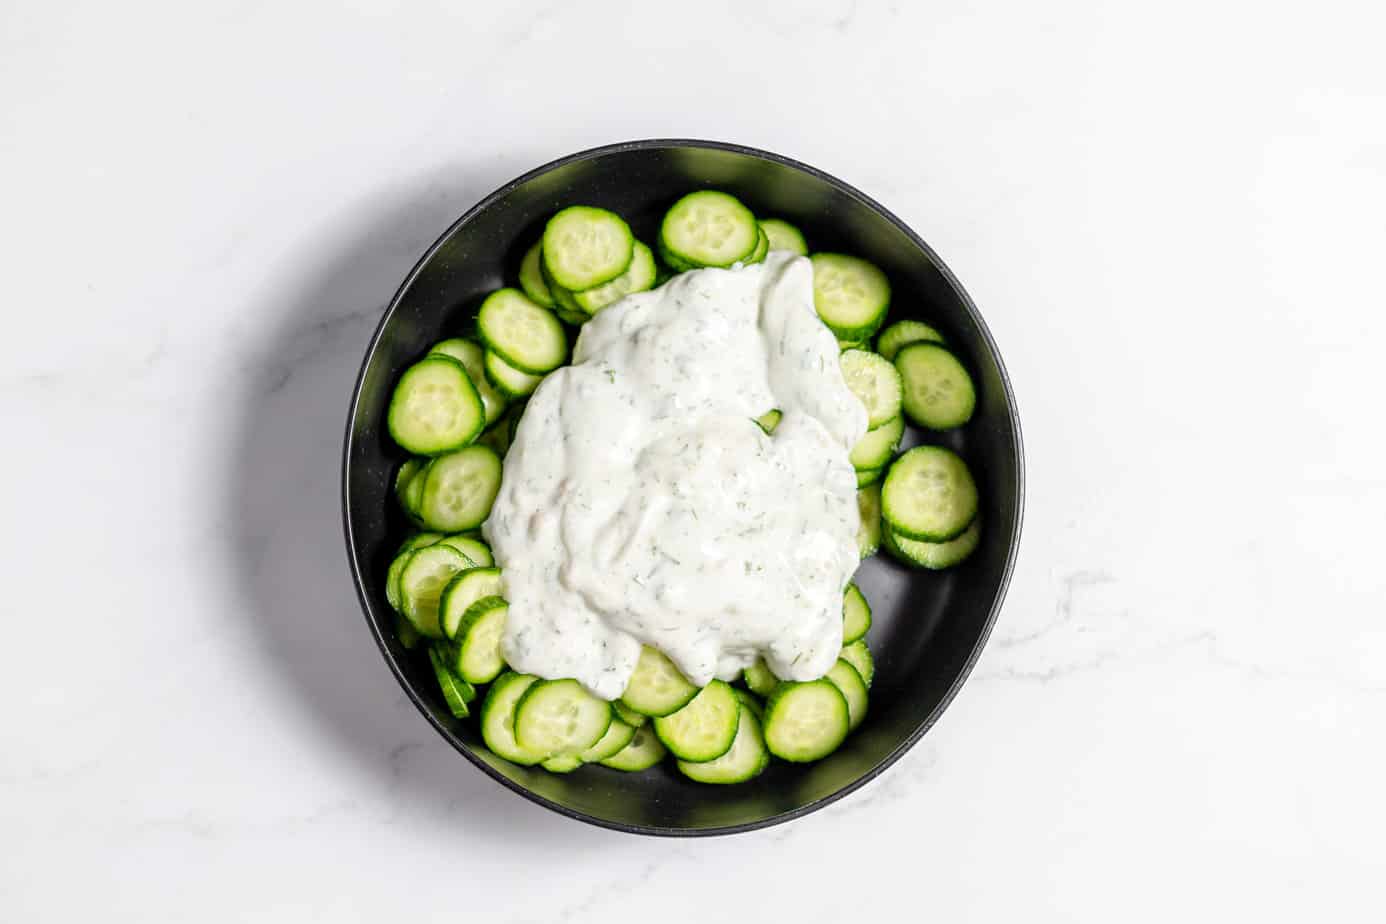 german salad dressing poured over sliced cucumbers in a black bowl